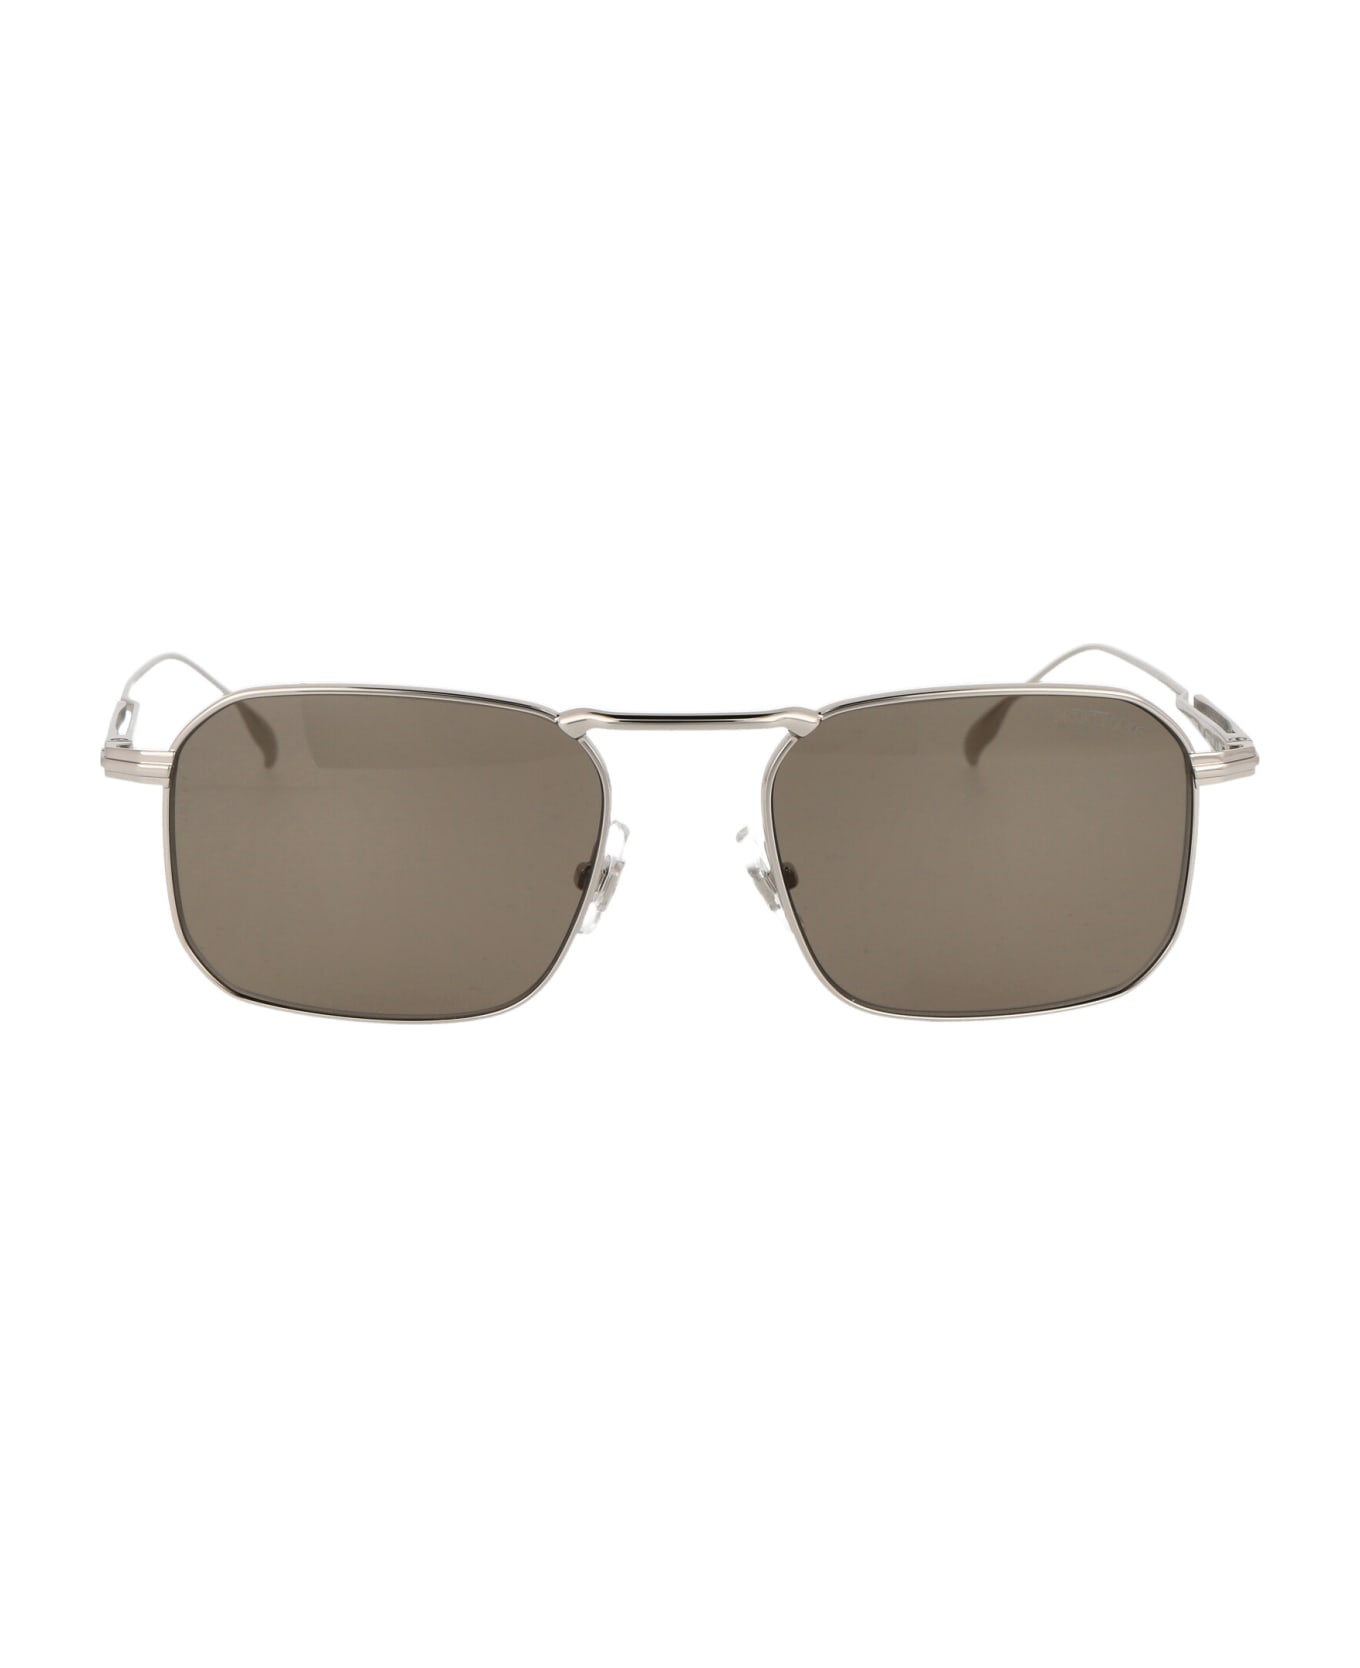 Montblanc Mb0218s Sunglasses - 003 SILVER SILVER BROWN